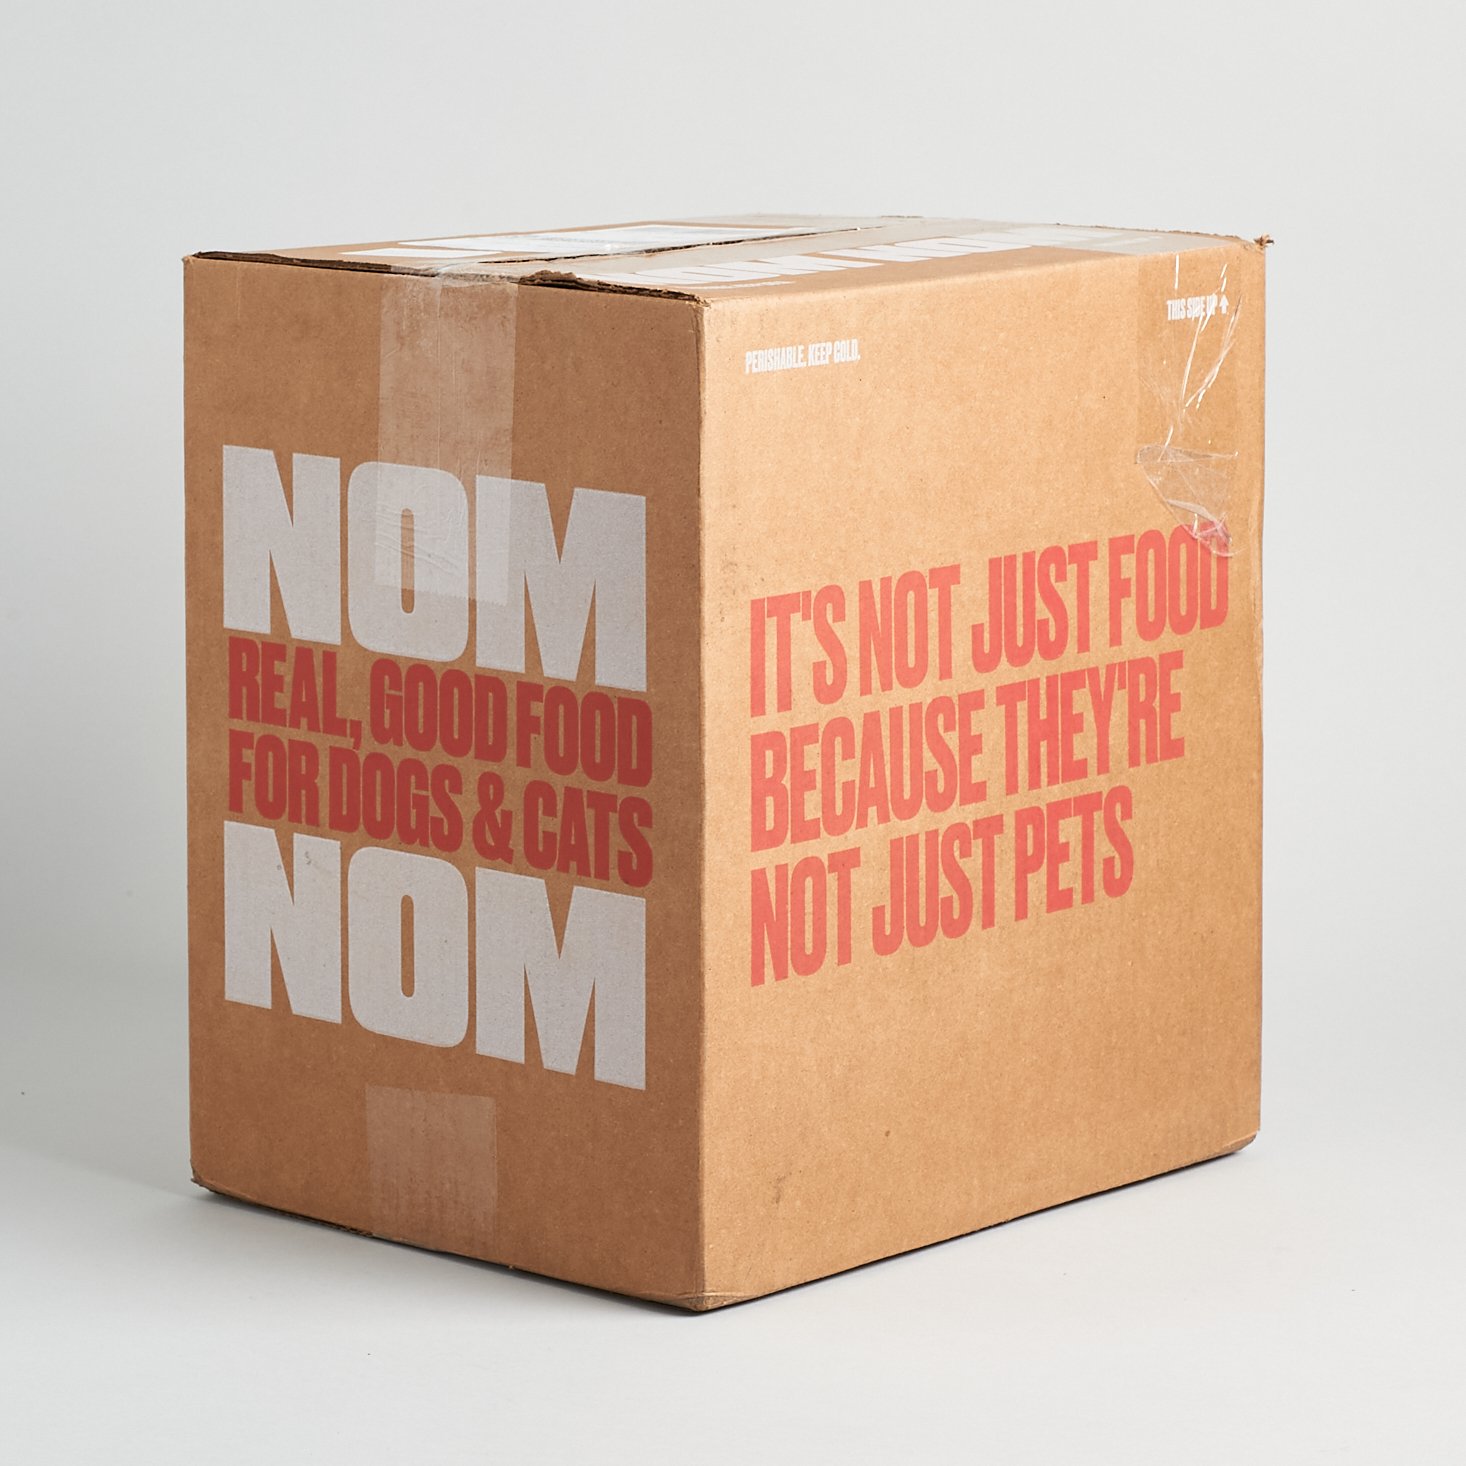 Nom Nom Review - Is Fresh Dog Food Really Worth It?